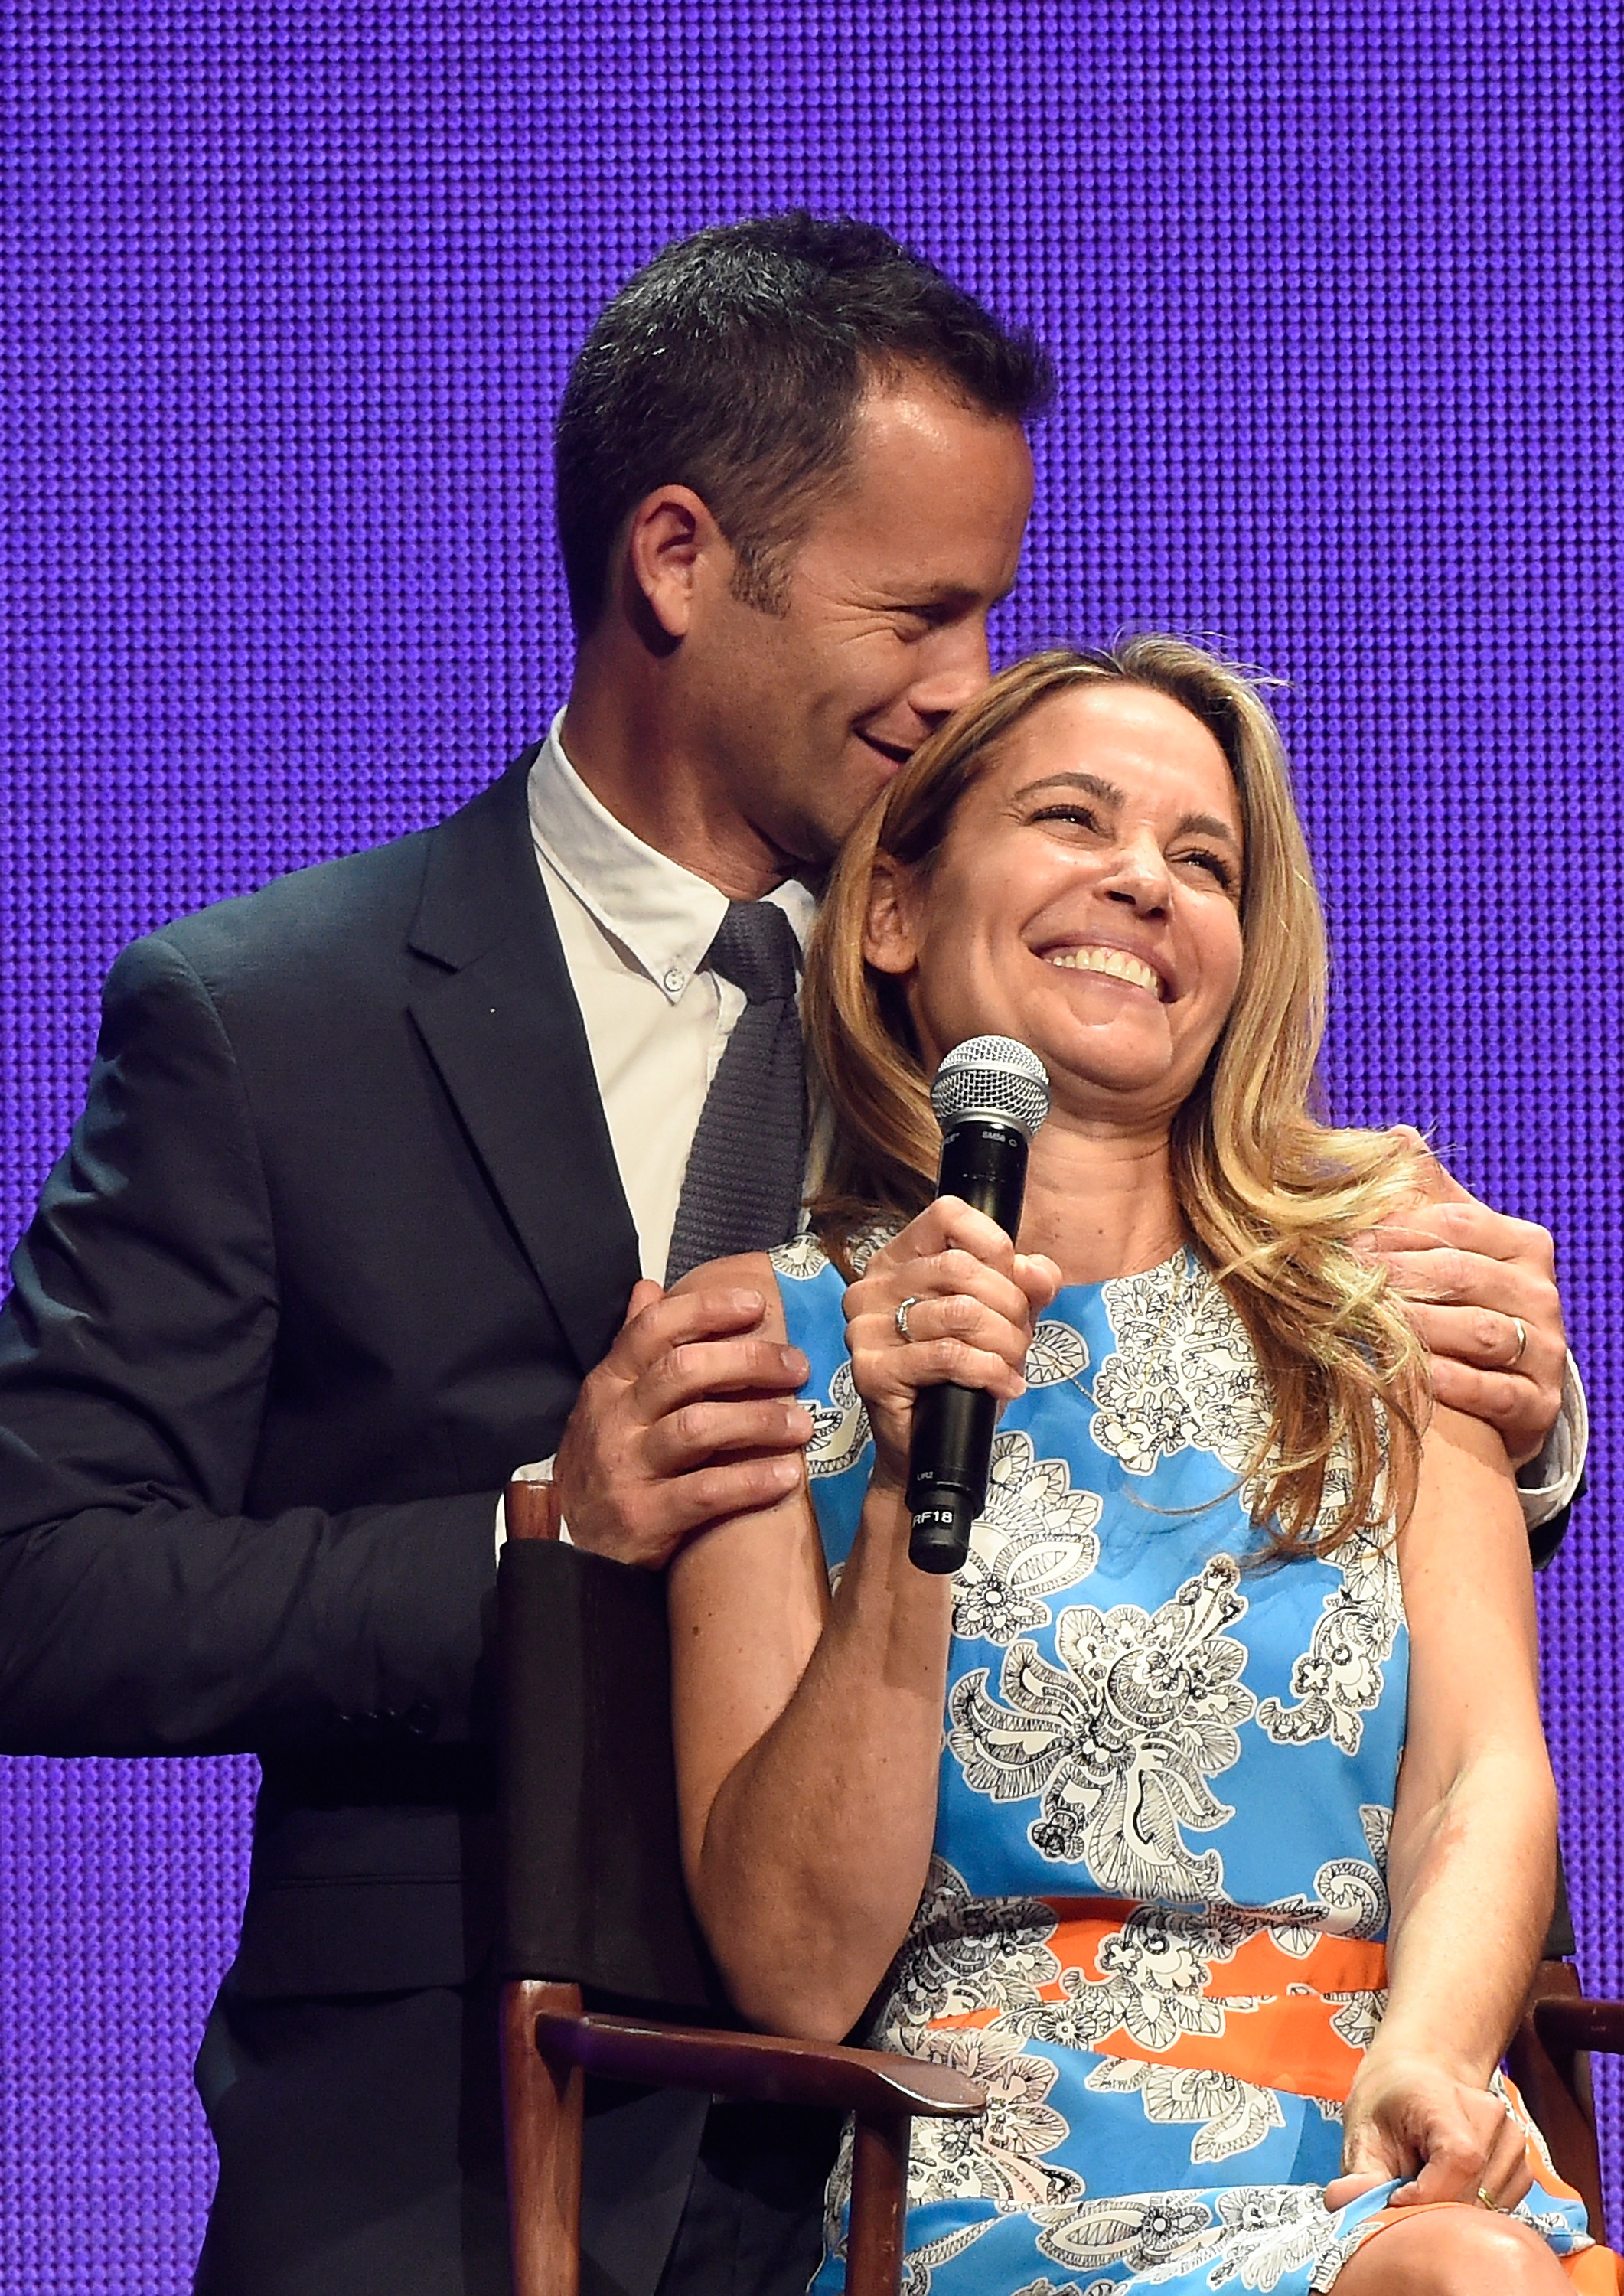 Kirk Cameron and Chelsea Noble in Nashville, Tennessee, on May 31, 2015 | Source: Getty Images